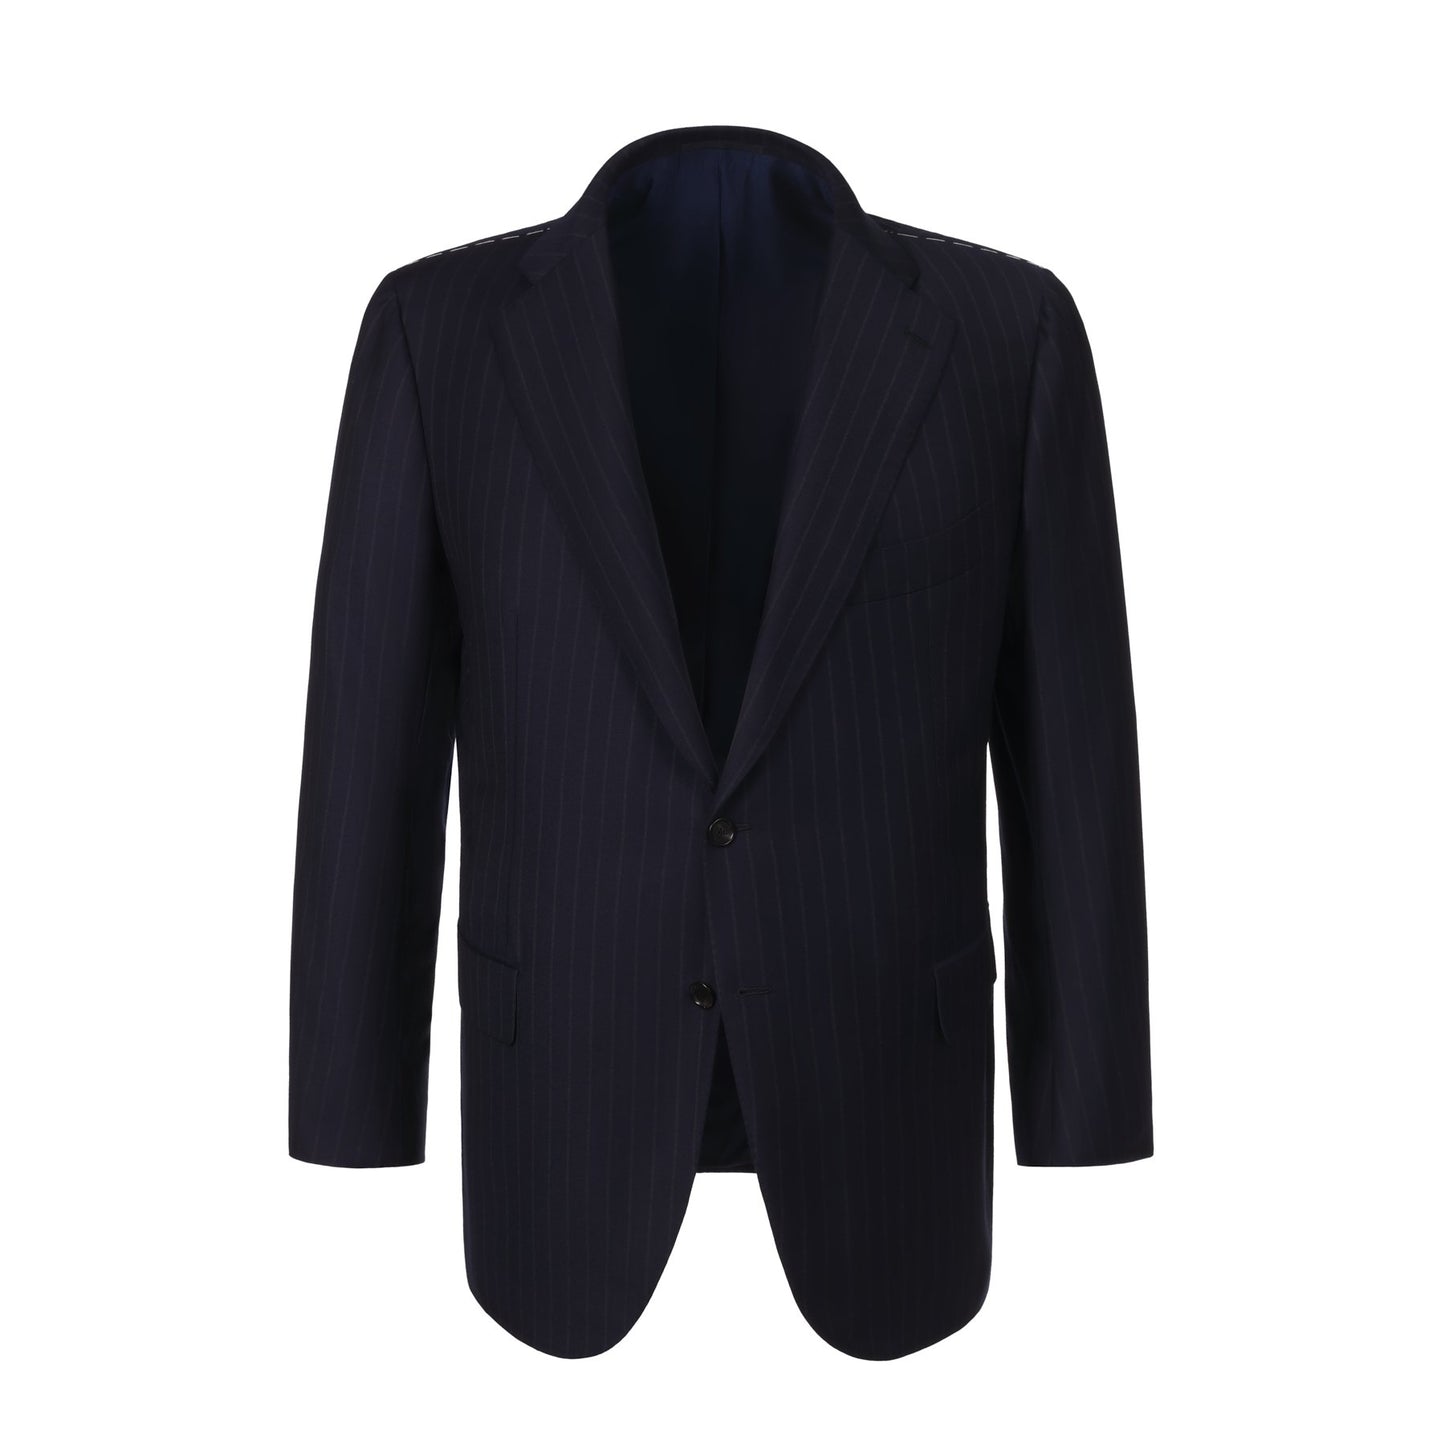 Cesare Attolini Single-Breasted Striped Wool and Cashmere-Blend Suit in Dark Blue - SARTALE